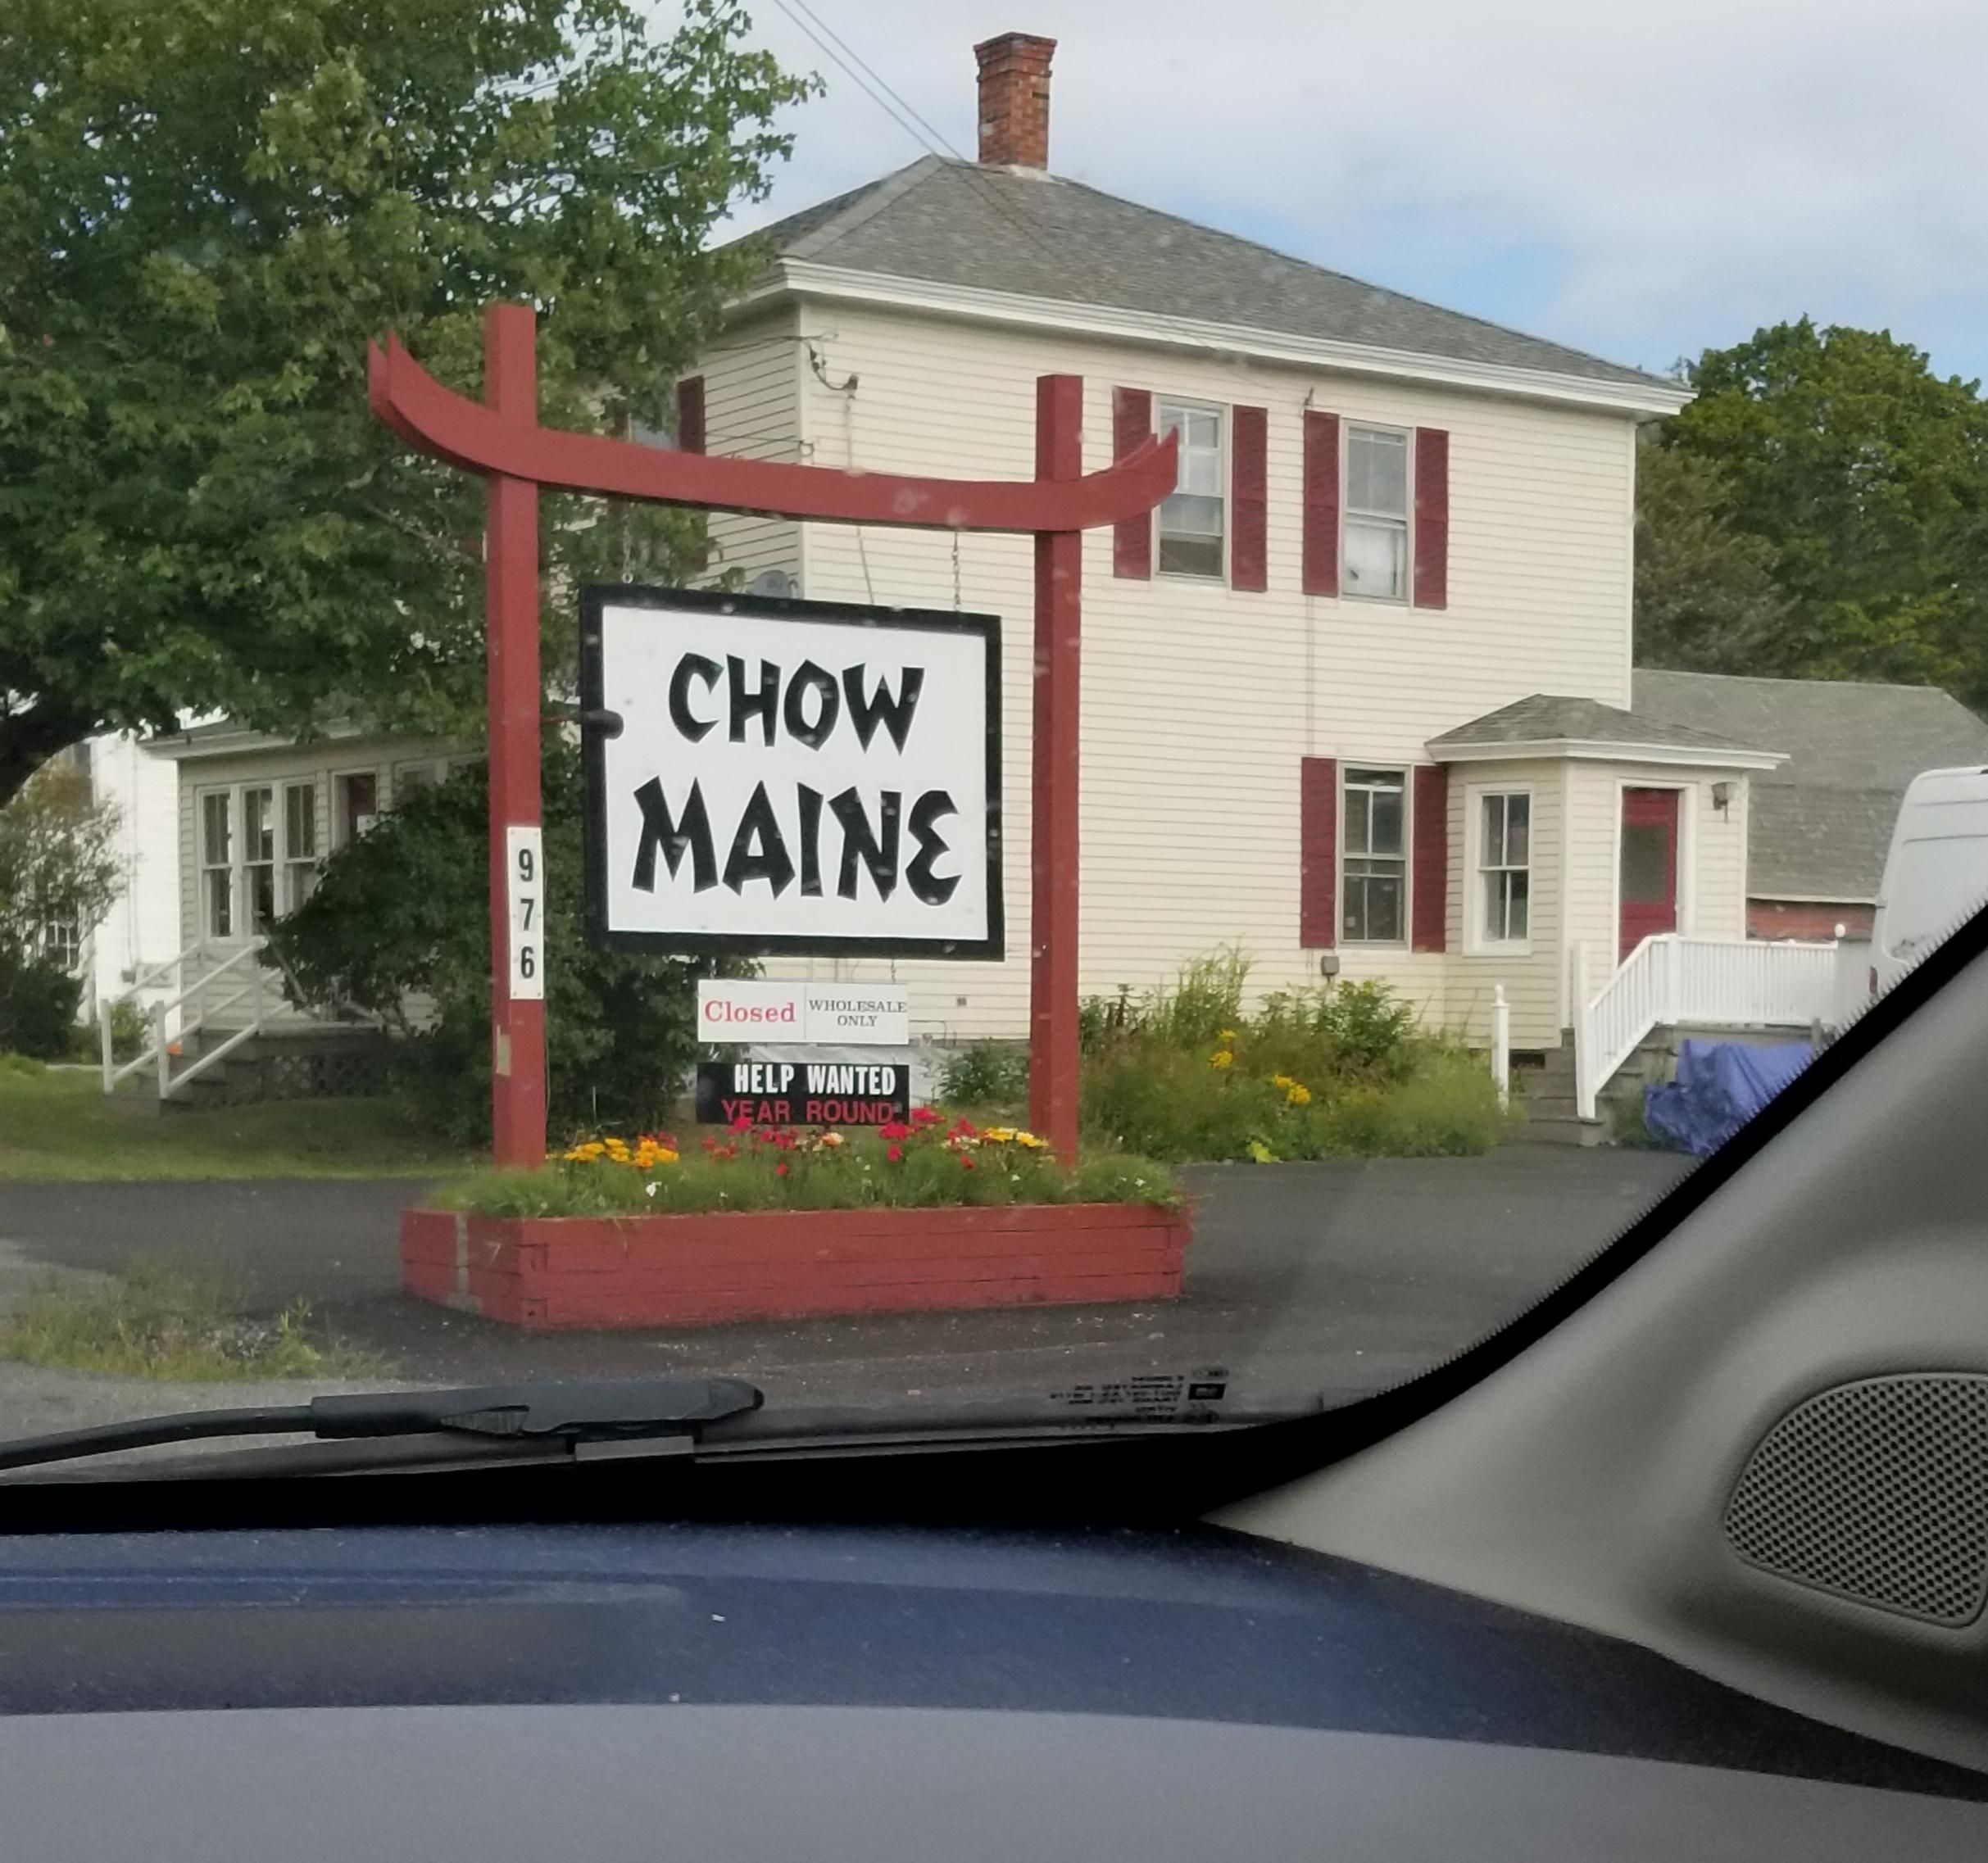 A Chinese restaurant I found while vacationing in Maine.